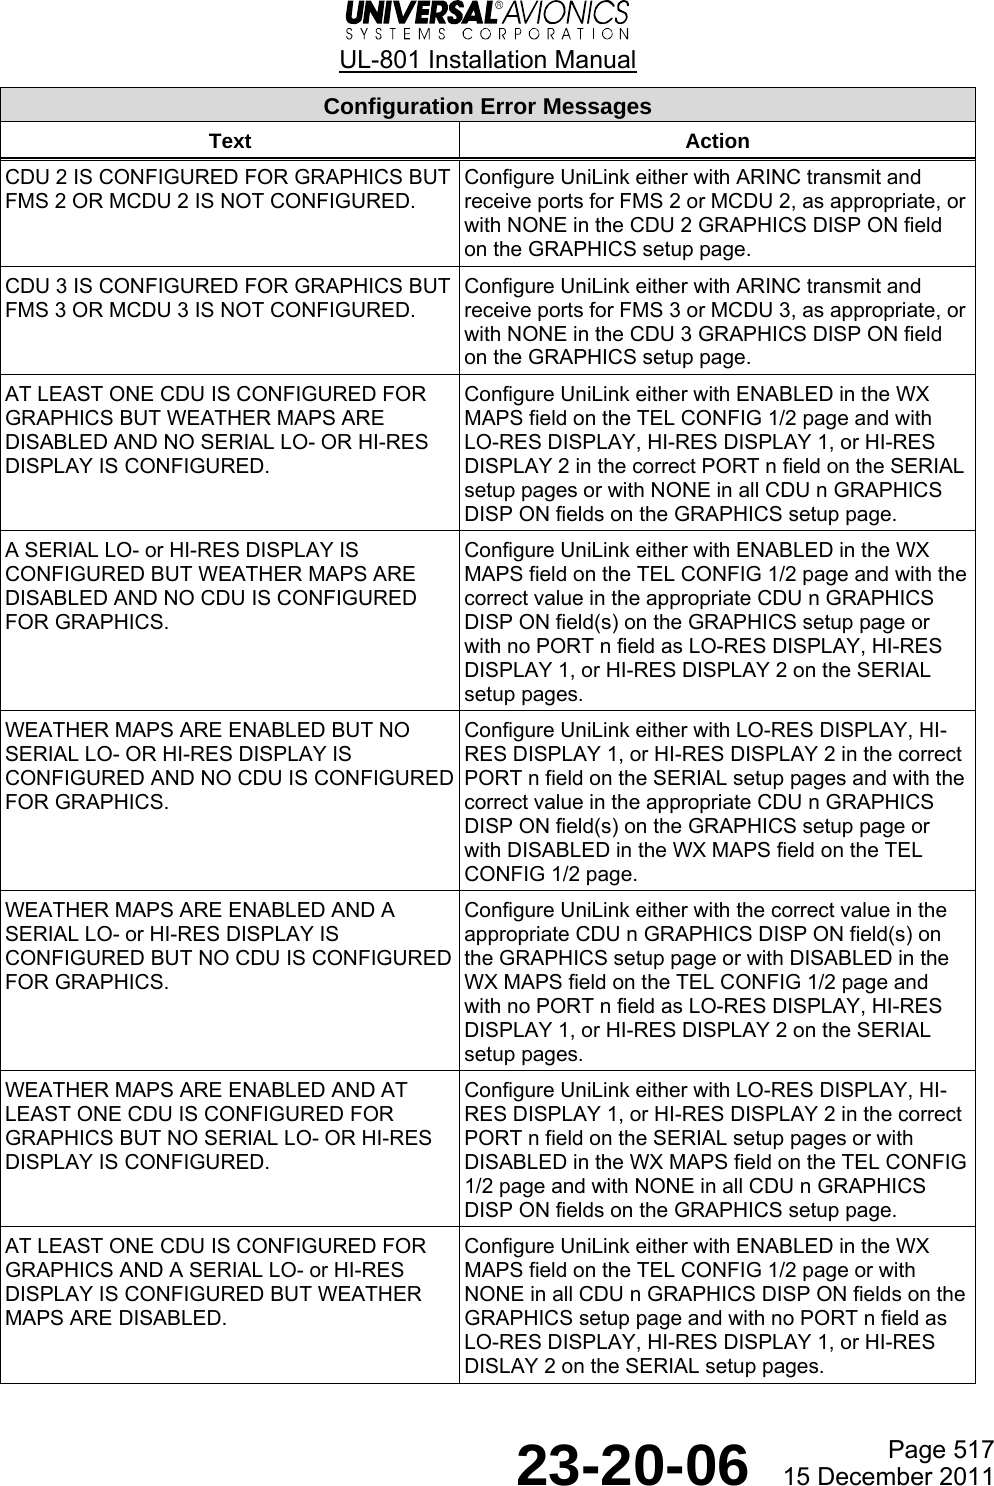  UL-801 Installation Manual  Page 517  23-20-06  15 December 2011 Configuration Error Messages Text Action CDU 2 IS CONFIGURED FOR GRAPHICS BUT FMS 2 OR MCDU 2 IS NOT CONFIGURED. Configure UniLink either with ARINC transmit and receive ports for FMS 2 or MCDU 2, as appropriate, or with NONE in the CDU 2 GRAPHICS DISP ON field on the GRAPHICS setup page. CDU 3 IS CONFIGURED FOR GRAPHICS BUT FMS 3 OR MCDU 3 IS NOT CONFIGURED. Configure UniLink either with ARINC transmit and receive ports for FMS 3 or MCDU 3, as appropriate, or with NONE in the CDU 3 GRAPHICS DISP ON field on the GRAPHICS setup page. AT LEAST ONE CDU IS CONFIGURED FOR GRAPHICS BUT WEATHER MAPS ARE DISABLED AND NO SERIAL LO- OR HI-RES DISPLAY IS CONFIGURED. Configure UniLink either with ENABLED in the WX MAPS field on the TEL CONFIG 1/2 page and with LO-RES DISPLAY, HI-RES DISPLAY 1, or HI-RES DISPLAY 2 in the correct PORT n field on the SERIAL setup pages or with NONE in all CDU n GRAPHICS DISP ON fields on the GRAPHICS setup page. A SERIAL LO- or HI-RES DISPLAY IS CONFIGURED BUT WEATHER MAPS ARE DISABLED AND NO CDU IS CONFIGURED FOR GRAPHICS. Configure UniLink either with ENABLED in the WX MAPS field on the TEL CONFIG 1/2 page and with the correct value in the appropriate CDU n GRAPHICS DISP ON field(s) on the GRAPHICS setup page or with no PORT n field as LO-RES DISPLAY, HI-RES DISPLAY 1, or HI-RES DISPLAY 2 on the SERIAL setup pages. WEATHER MAPS ARE ENABLED BUT NO SERIAL LO- OR HI-RES DISPLAY IS CONFIGURED AND NO CDU IS CONFIGURED FOR GRAPHICS. Configure UniLink either with LO-RES DISPLAY, HI-RES DISPLAY 1, or HI-RES DISPLAY 2 in the correct PORT n field on the SERIAL setup pages and with the correct value in the appropriate CDU n GRAPHICS DISP ON field(s) on the GRAPHICS setup page or with DISABLED in the WX MAPS field on the TEL CONFIG 1/2 page. WEATHER MAPS ARE ENABLED AND A SERIAL LO- or HI-RES DISPLAY IS CONFIGURED BUT NO CDU IS CONFIGURED FOR GRAPHICS. Configure UniLink either with the correct value in the appropriate CDU n GRAPHICS DISP ON field(s) on the GRAPHICS setup page or with DISABLED in the WX MAPS field on the TEL CONFIG 1/2 page and with no PORT n field as LO-RES DISPLAY, HI-RES DISPLAY 1, or HI-RES DISPLAY 2 on the SERIAL setup pages. WEATHER MAPS ARE ENABLED AND AT LEAST ONE CDU IS CONFIGURED FOR GRAPHICS BUT NO SERIAL LO- OR HI-RES DISPLAY IS CONFIGURED. Configure UniLink either with LO-RES DISPLAY, HI-RES DISPLAY 1, or HI-RES DISPLAY 2 in the correct PORT n field on the SERIAL setup pages or with DISABLED in the WX MAPS field on the TEL CONFIG 1/2 page and with NONE in all CDU n GRAPHICS DISP ON fields on the GRAPHICS setup page. AT LEAST ONE CDU IS CONFIGURED FOR GRAPHICS AND A SERIAL LO- or HI-RES DISPLAY IS CONFIGURED BUT WEATHER MAPS ARE DISABLED. Configure UniLink either with ENABLED in the WX MAPS field on the TEL CONFIG 1/2 page or with NONE in all CDU n GRAPHICS DISP ON fields on the GRAPHICS setup page and with no PORT n field as LO-RES DISPLAY, HI-RES DISPLAY 1, or HI-RES DISLAY 2 on the SERIAL setup pages. 